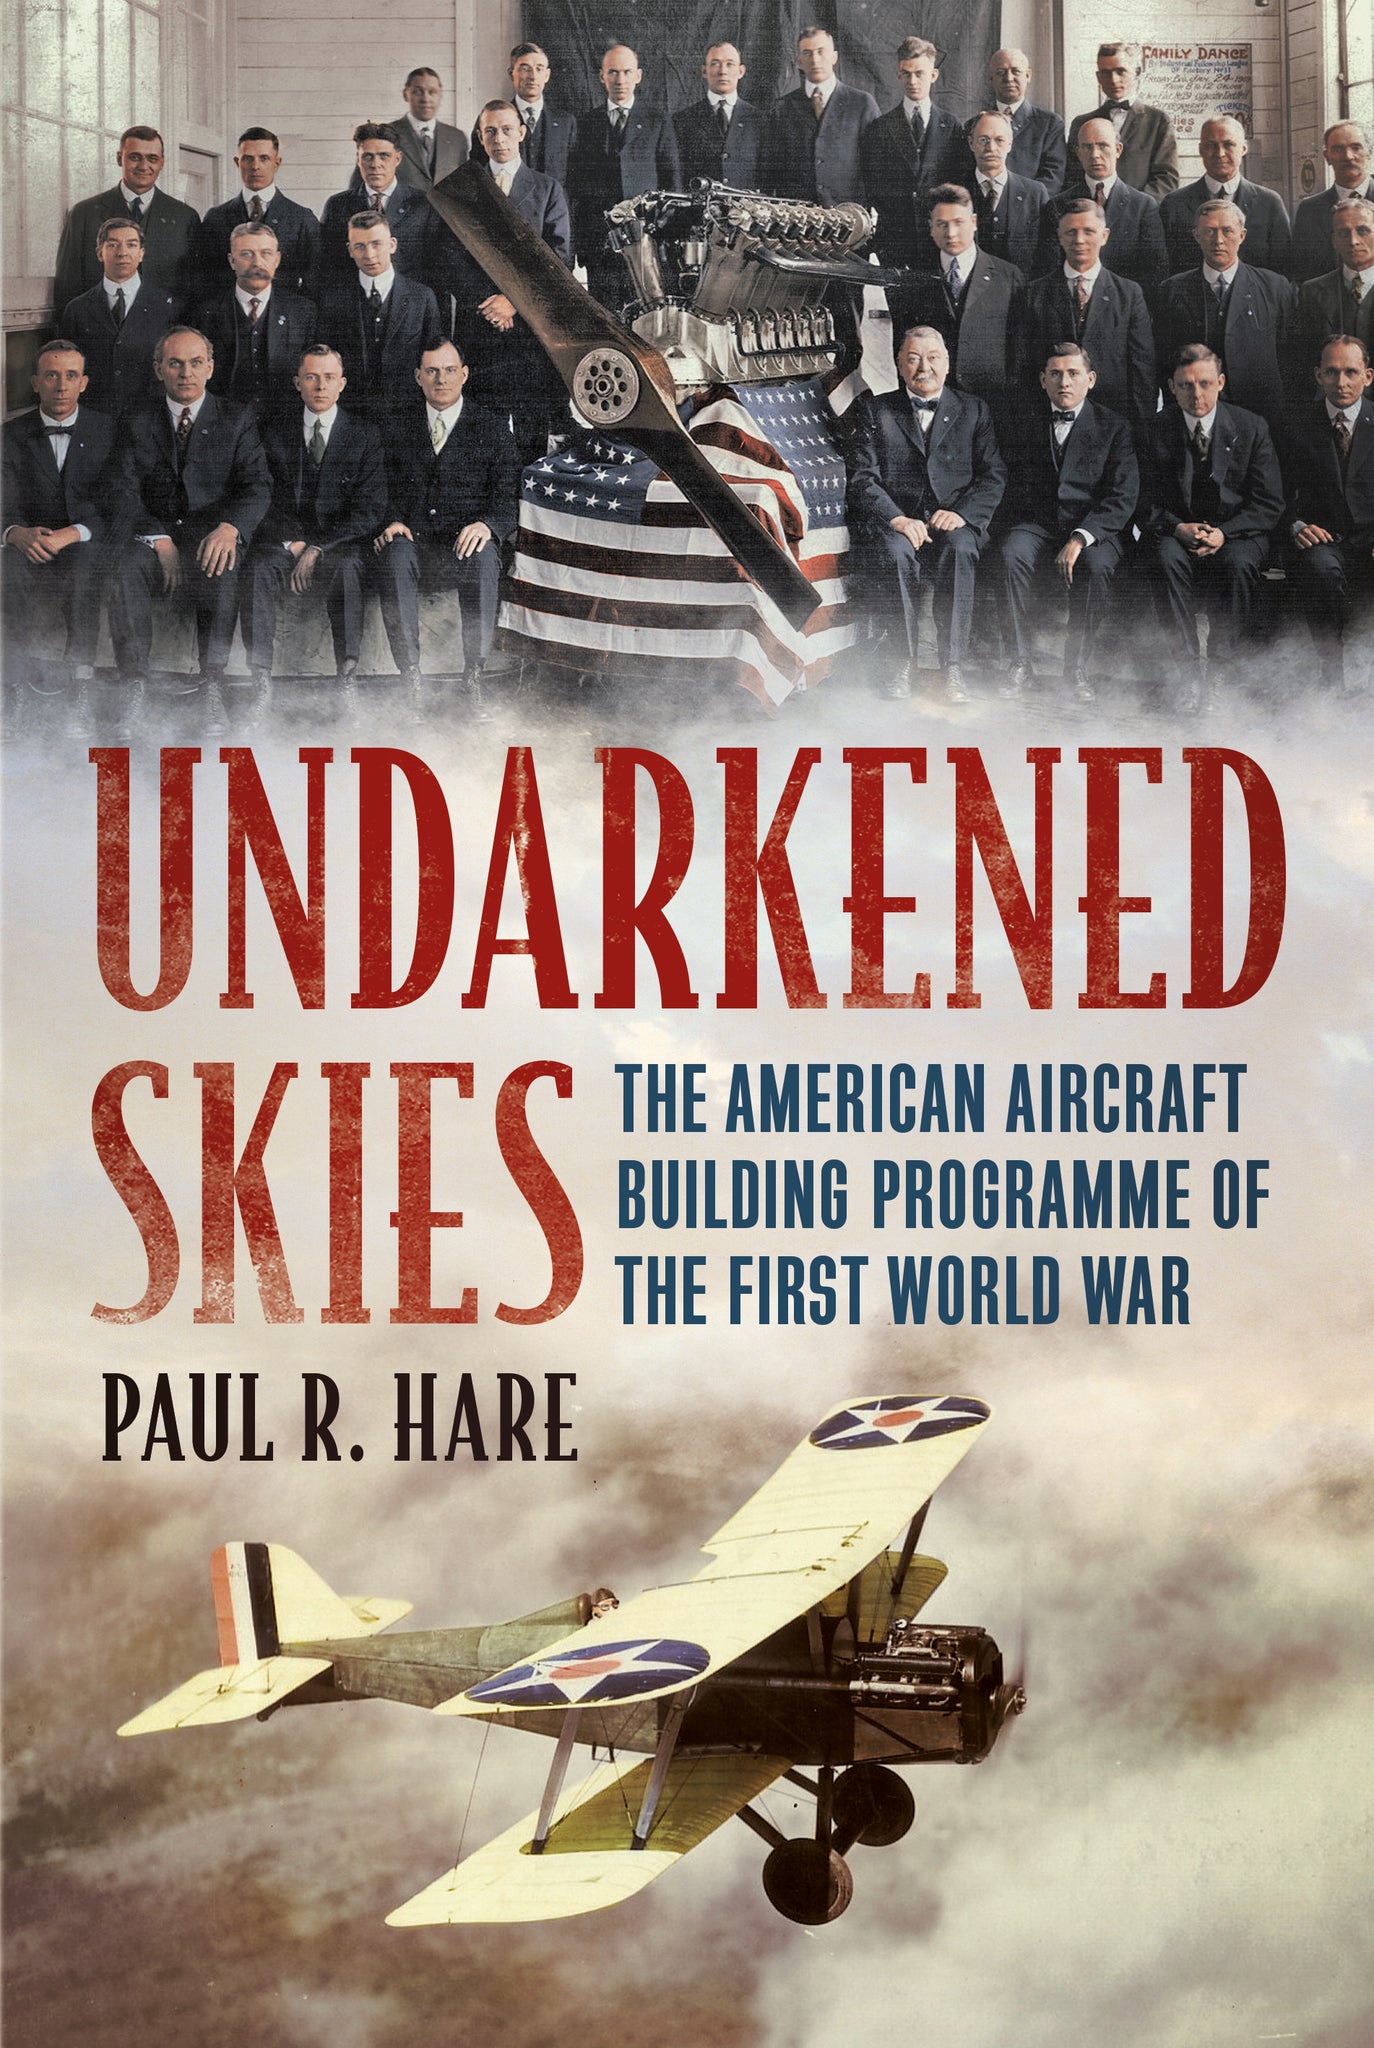 Undarkened Skies: The American Aircraft Building Programme of the First World War